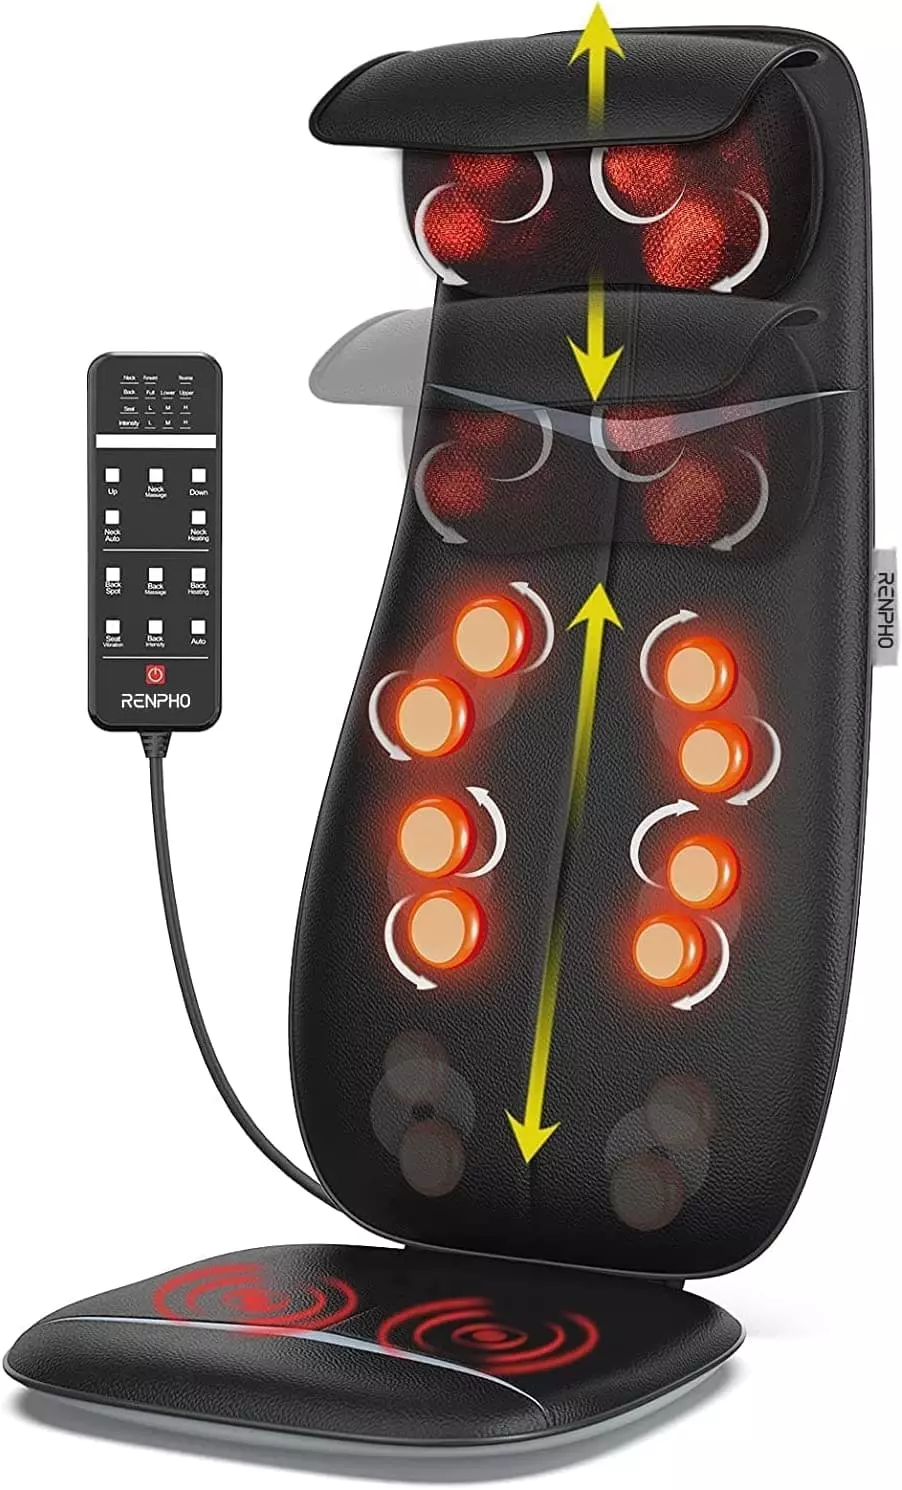 Cotsoco Handheld Neck Back Massager - Double Head Electric Full